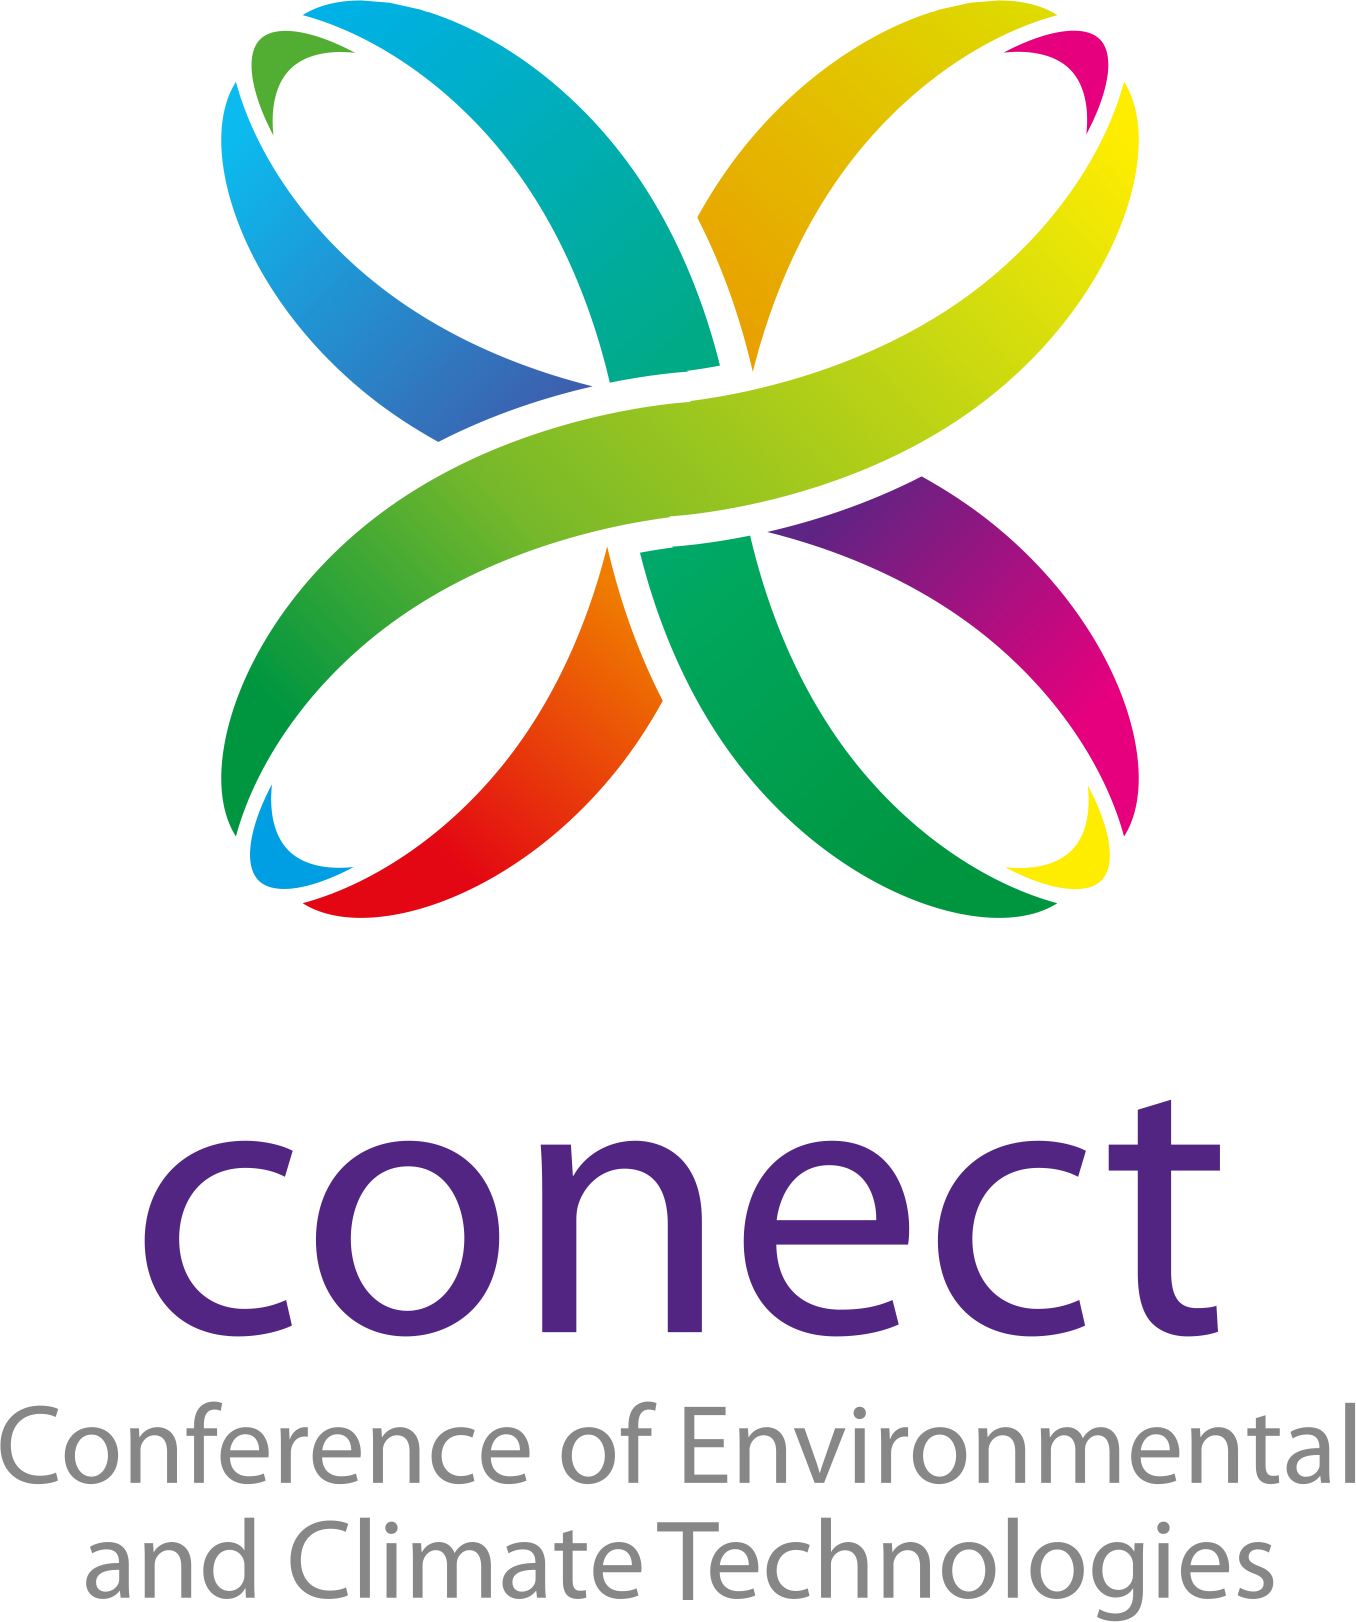 CONECT 2020 - International Scientific Conference of Environmental and Climate Technologies